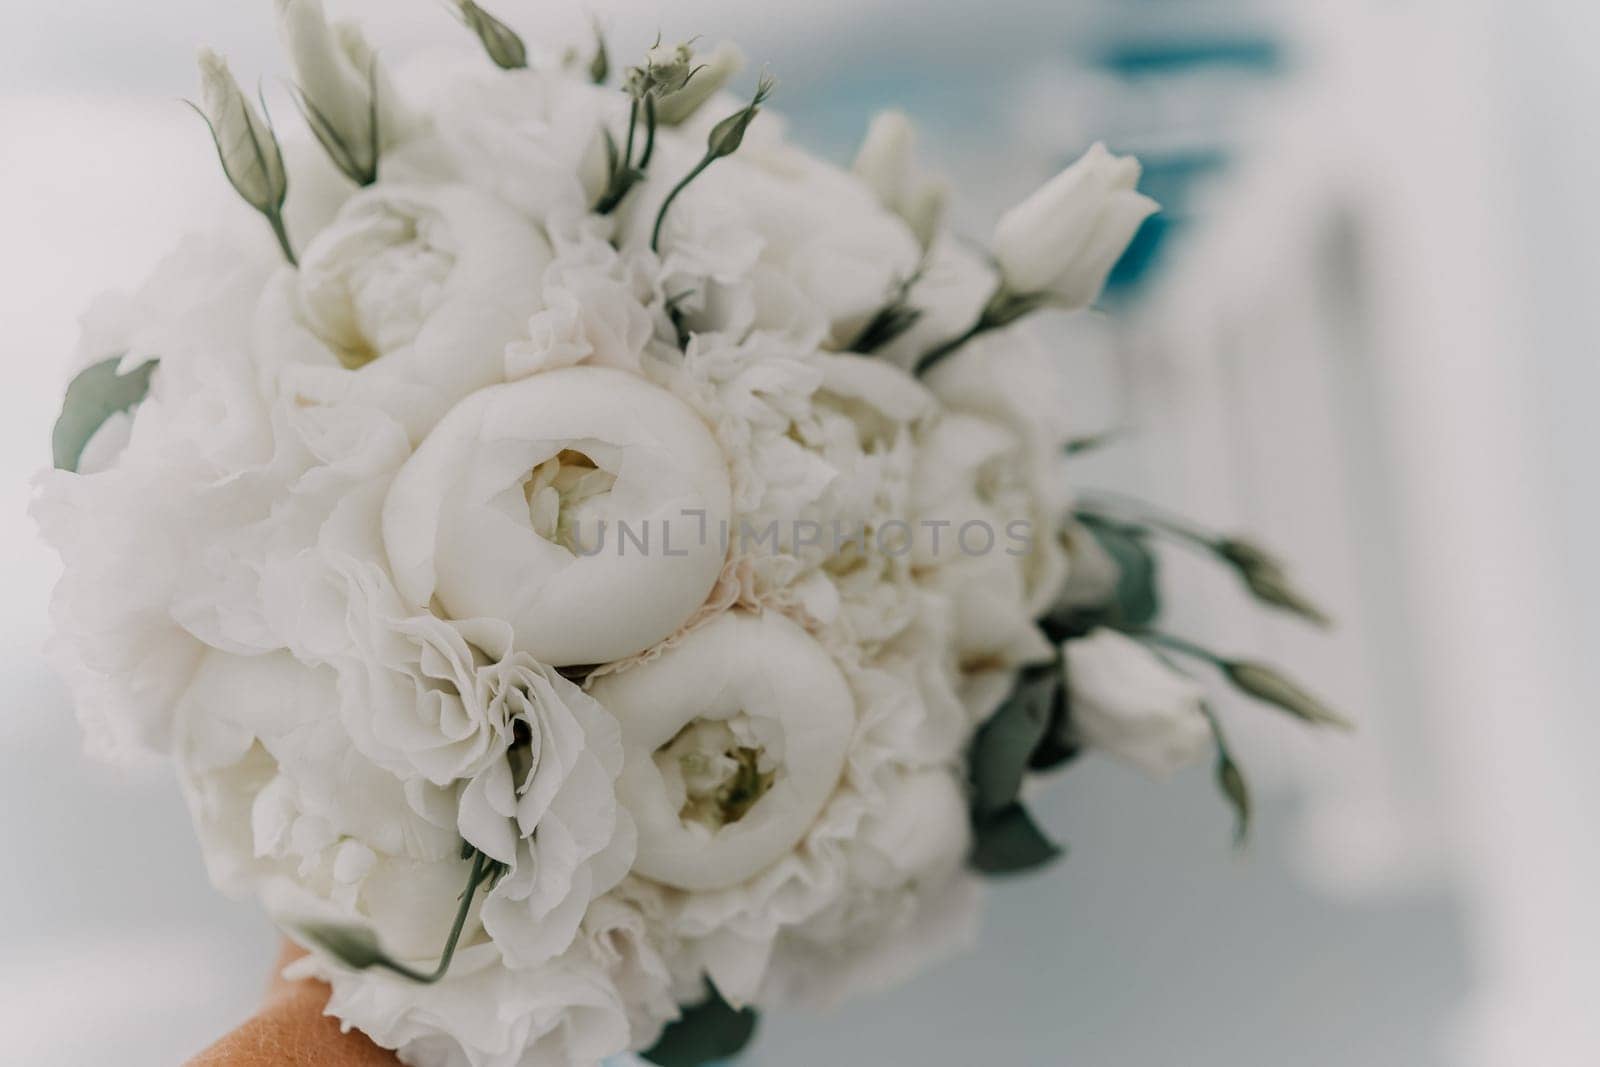 A bouquet of white flowers is being held by a person. The flowers are arranged in a way that they are not too close to each other, giving the impression of a beautiful and elegant arrangement